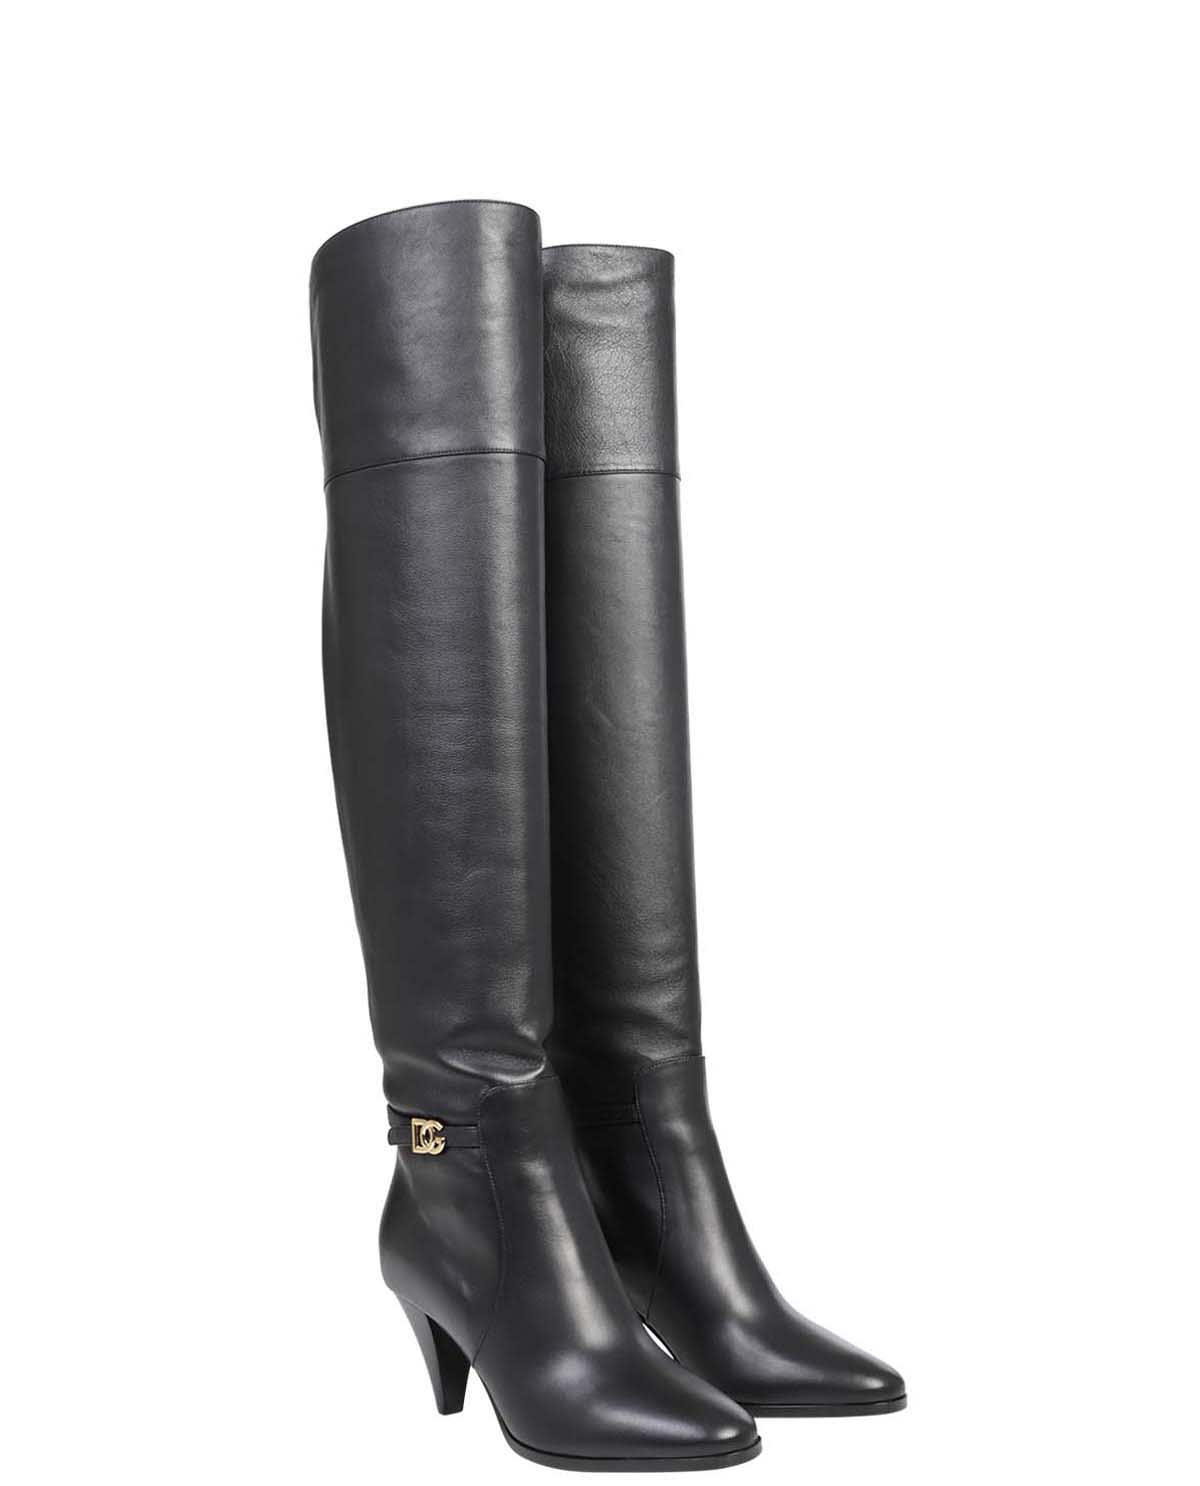 Buy Dolce & Gabbana Black Benson Boots online, shop Dolce & Gabbana shoes with free shipping